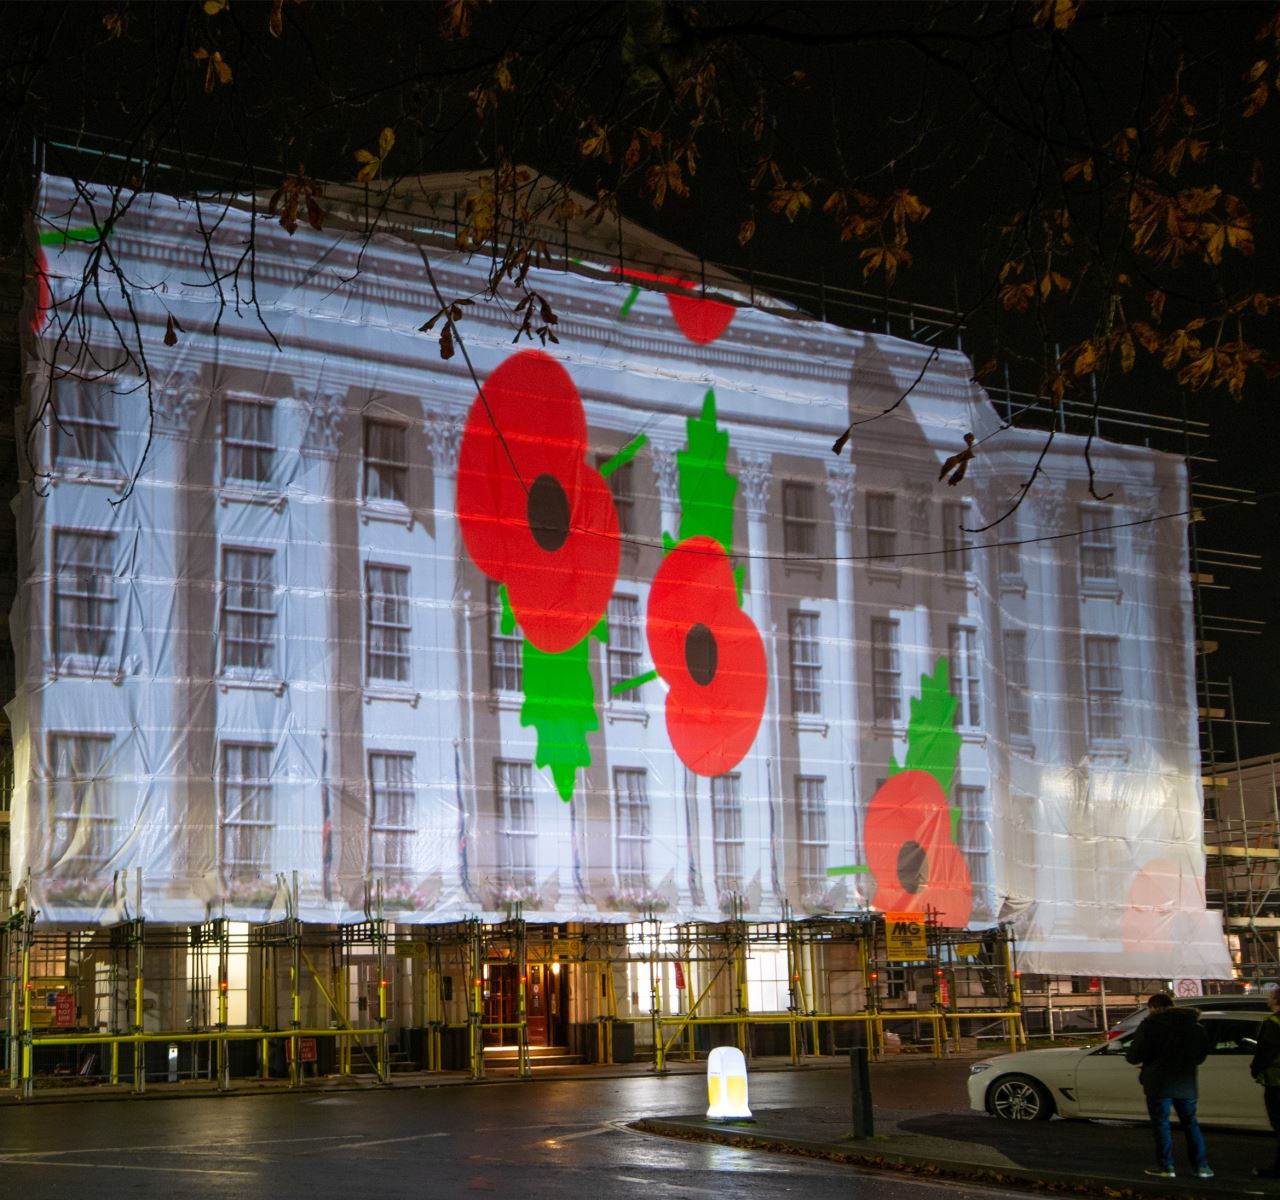 Queens Hotel projection for Remembrance Sunday